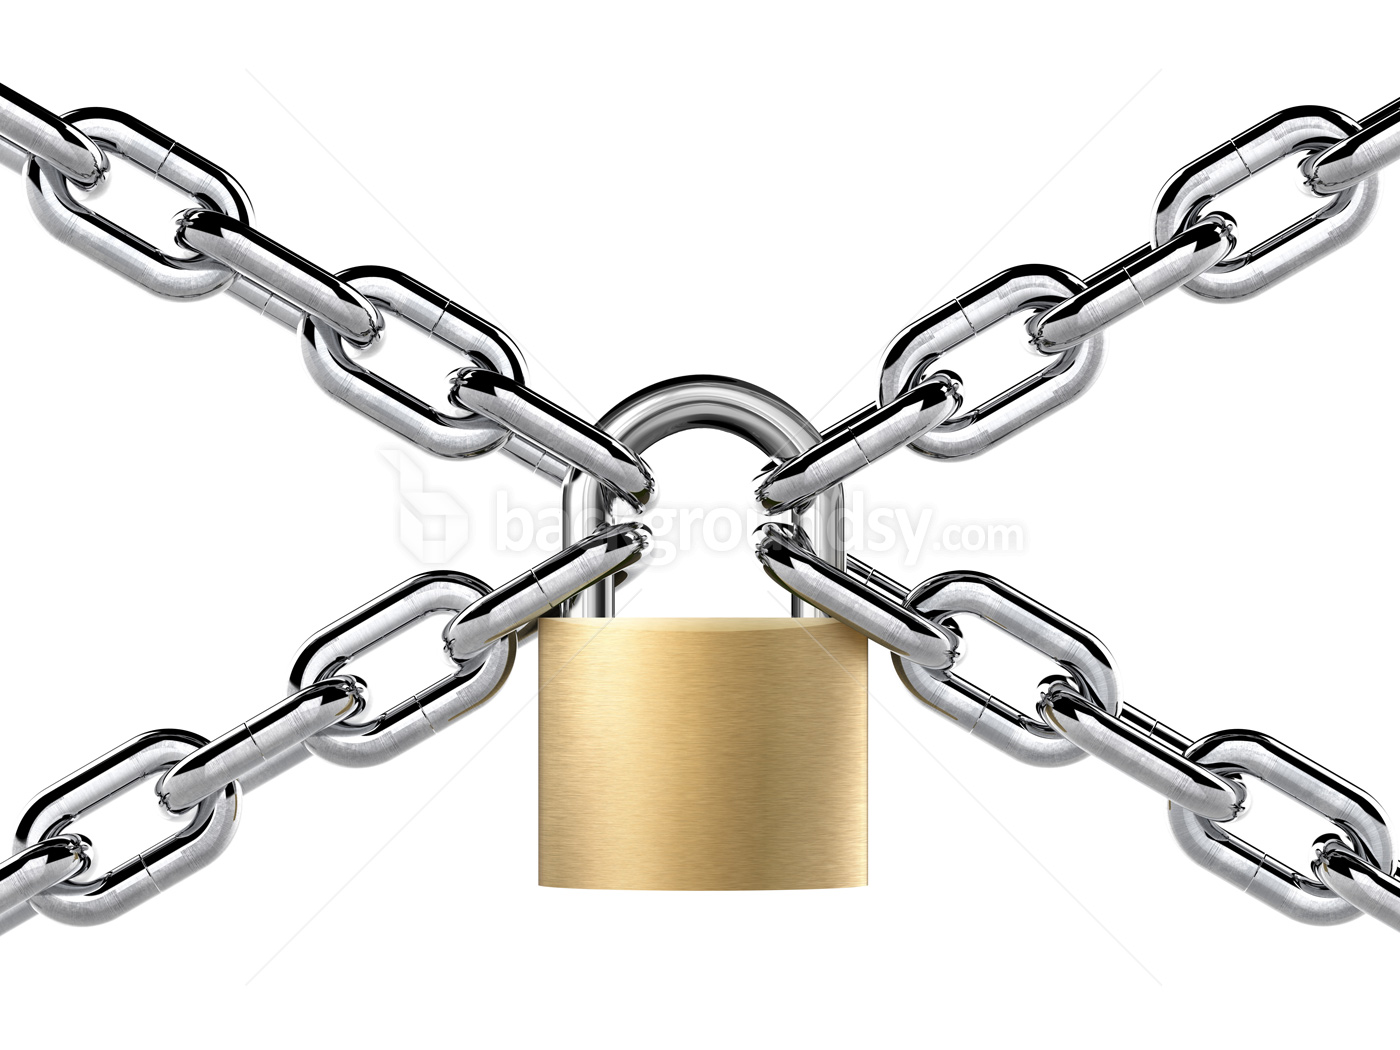 http://www.backgroundsy.com/file/preview/locked-in-chains.jpg